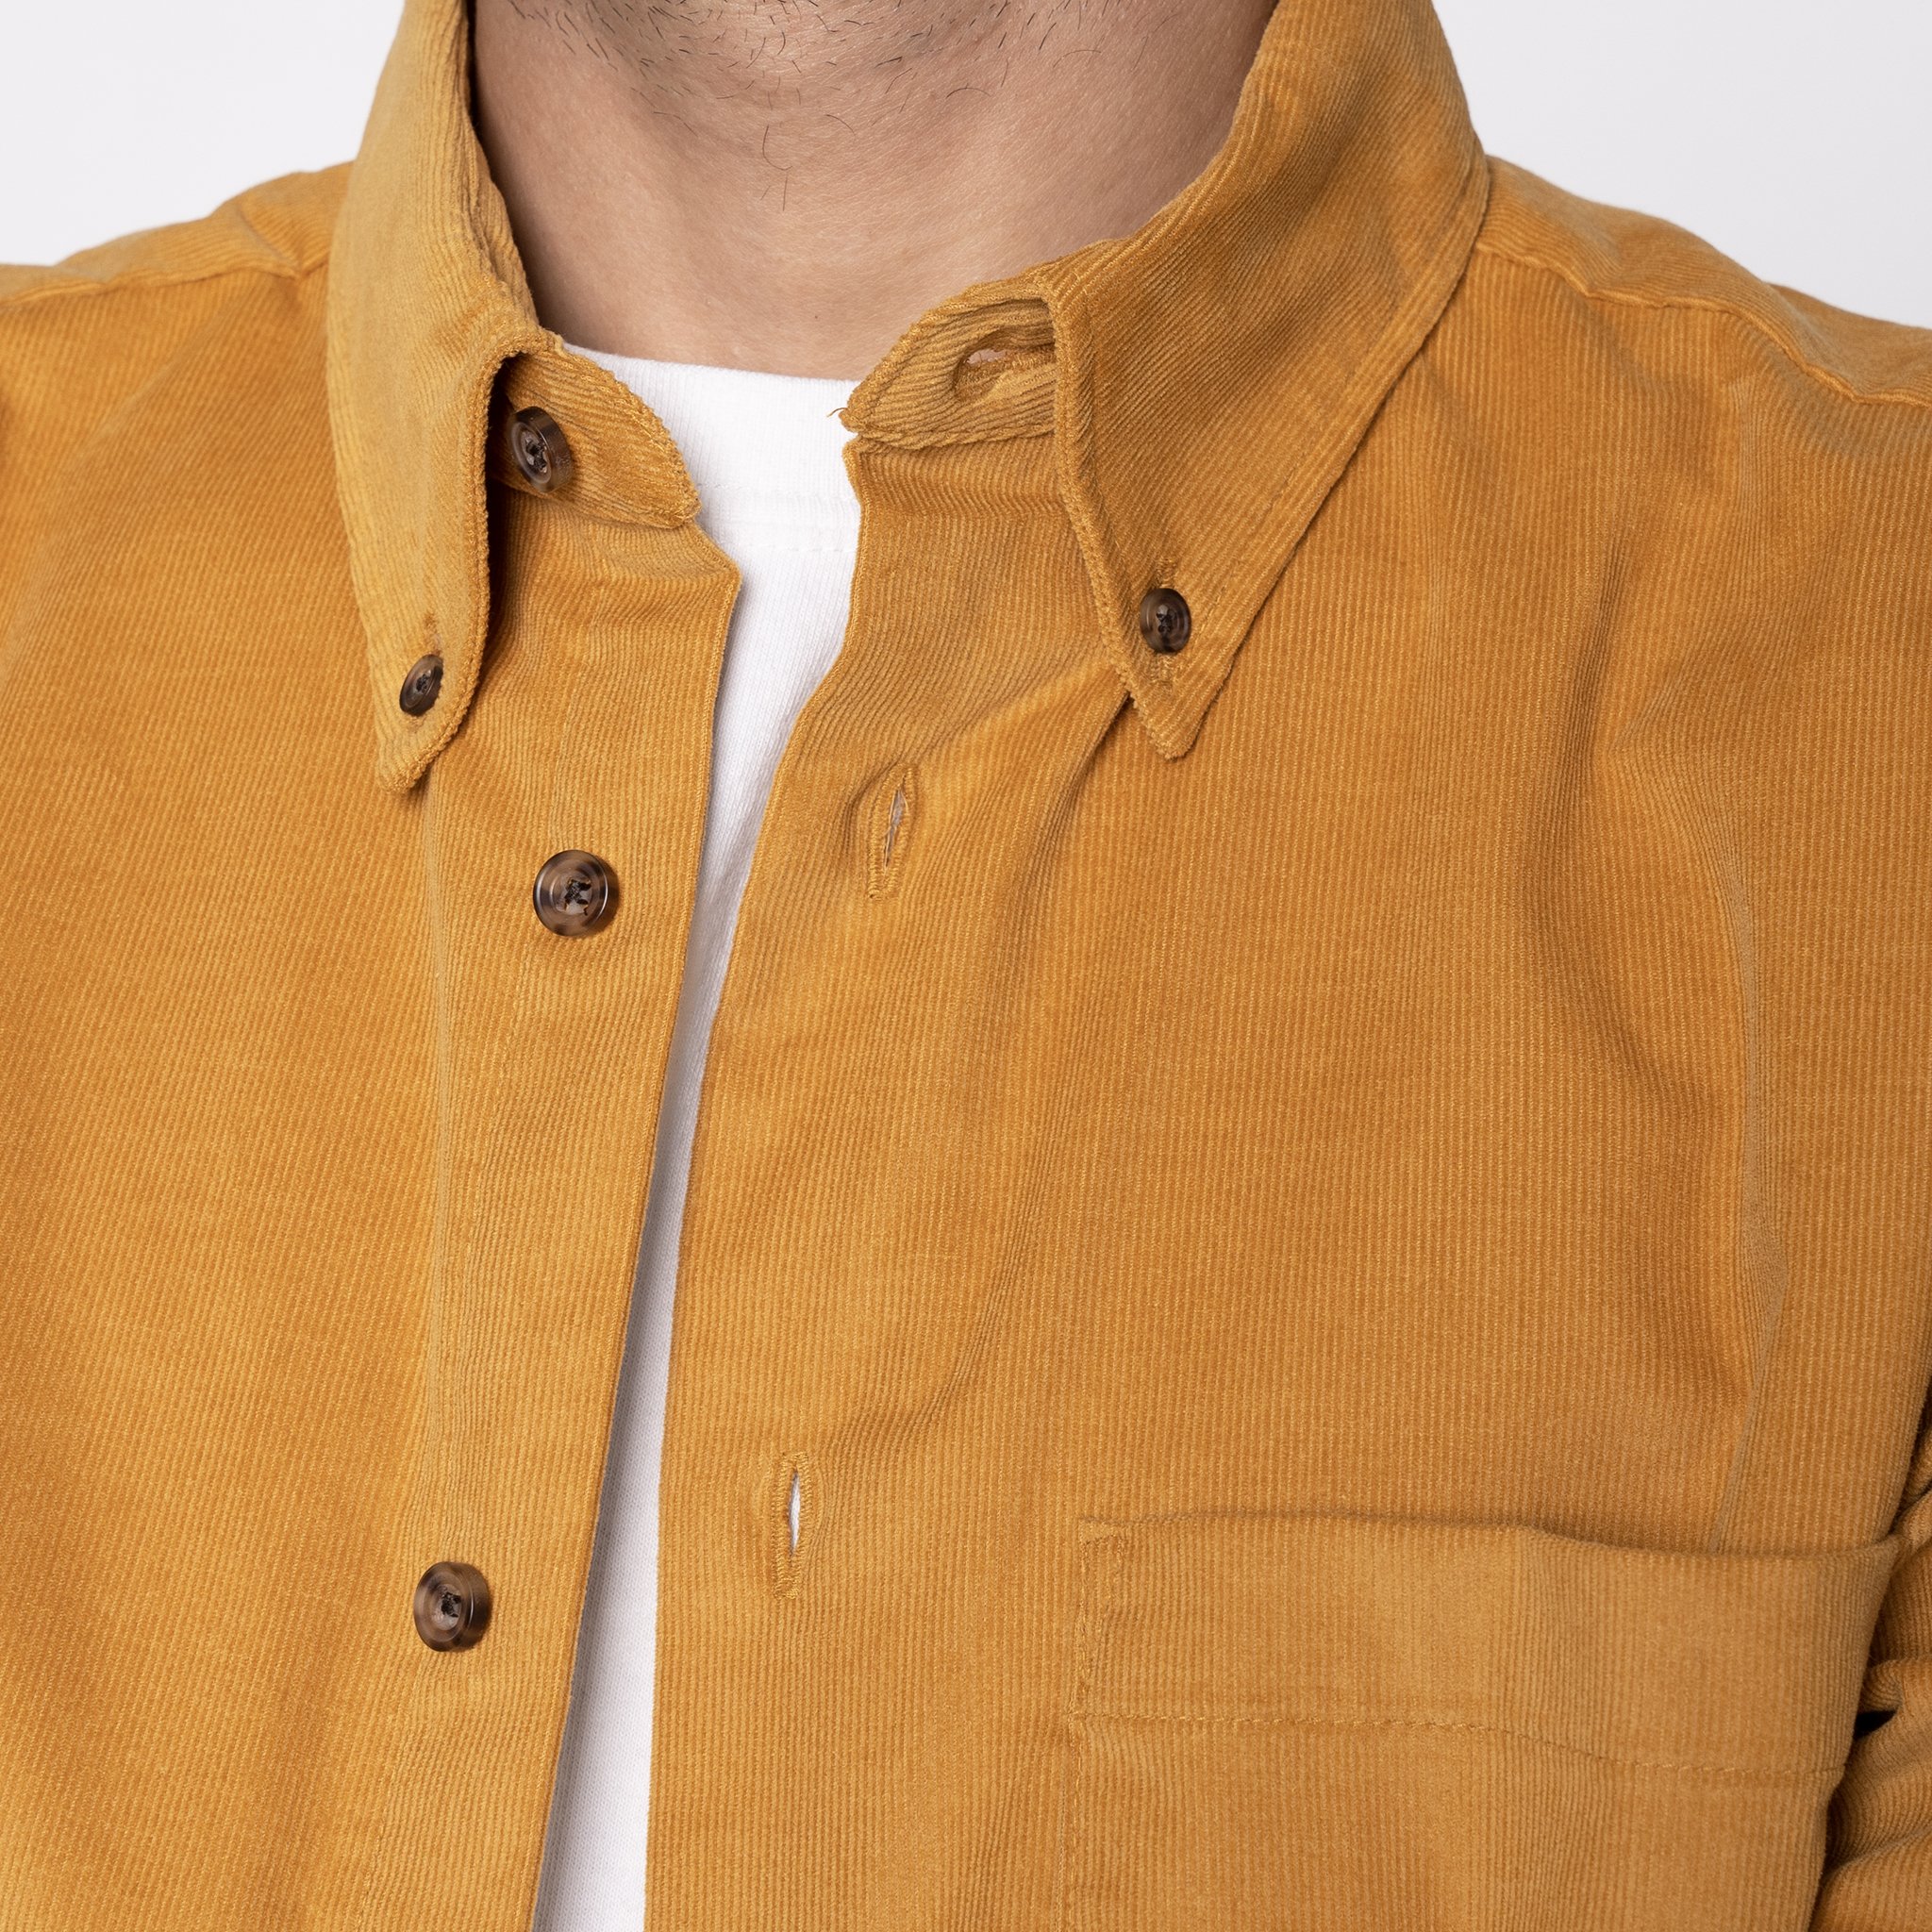  Easy Shirt - Cotton Dyed Corduroy - Golden Brown 